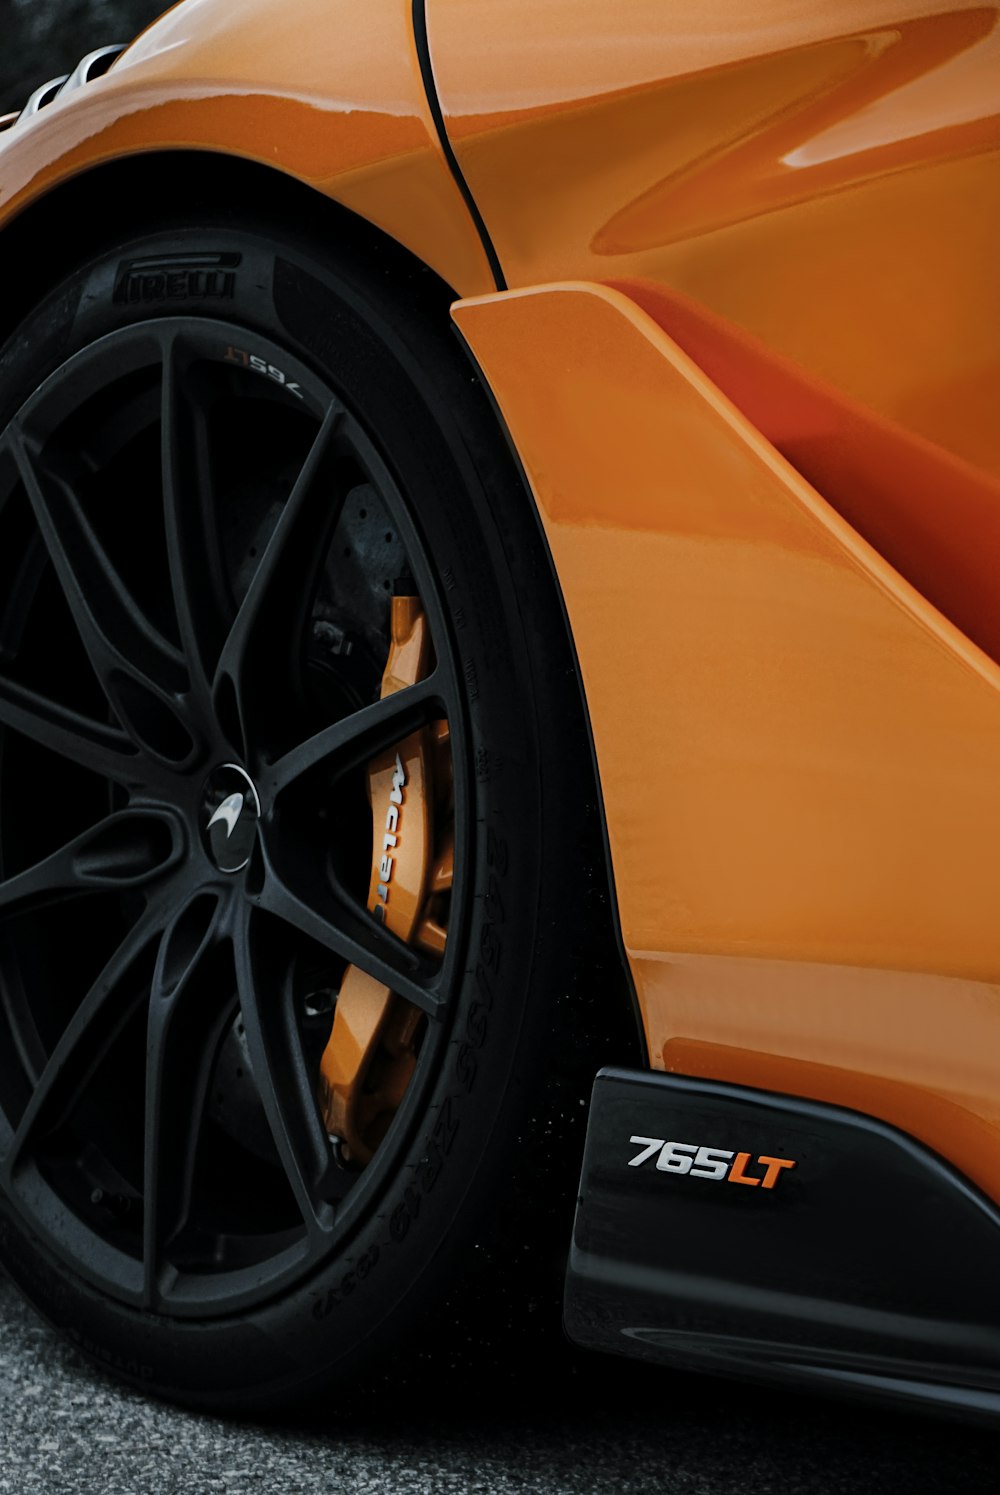 a close up of the front wheels of a sports car